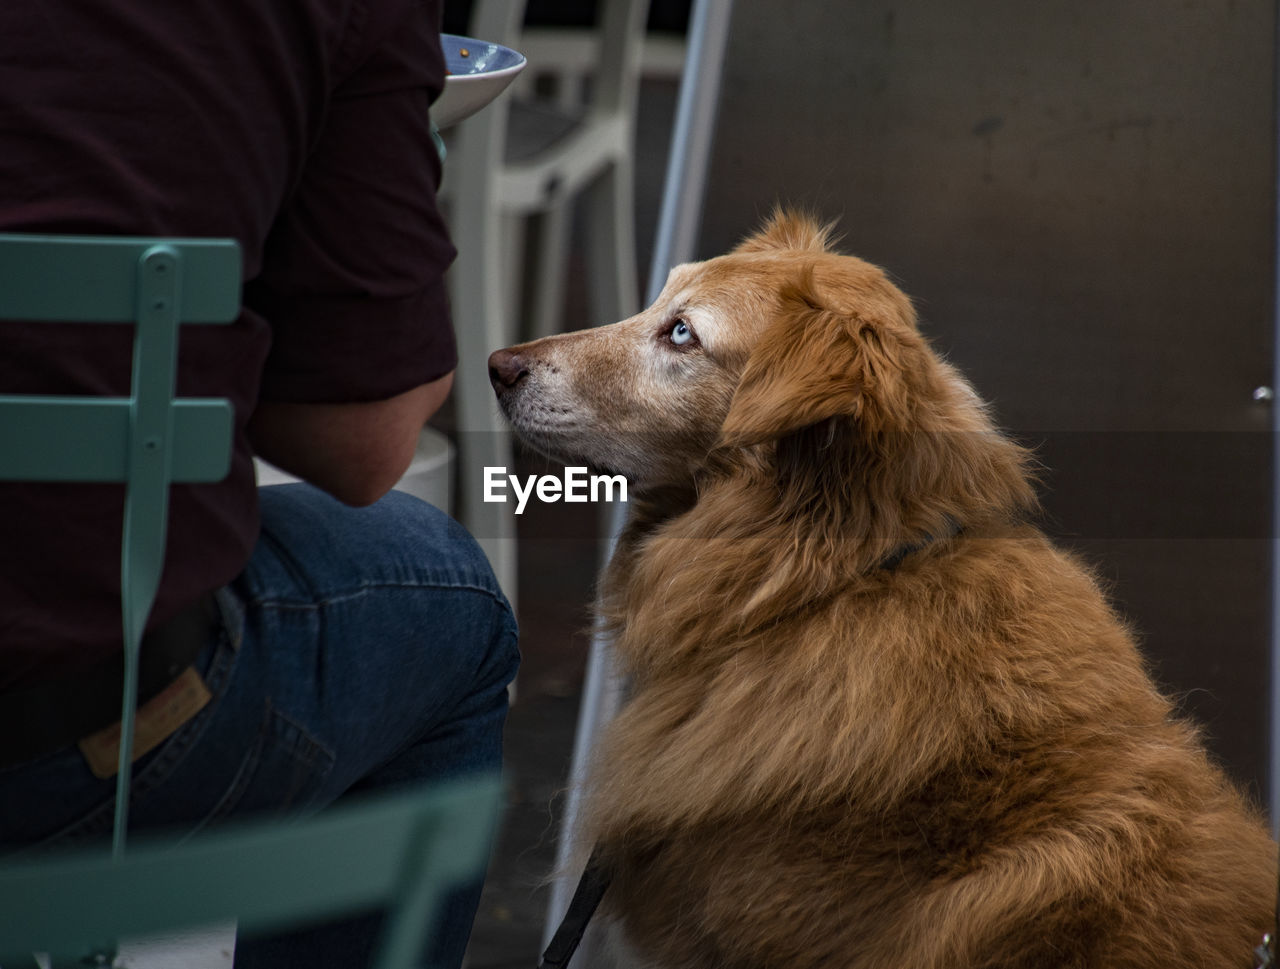 Pet dog waits for a bit if food from the owner's plate at an outdoor cafe.